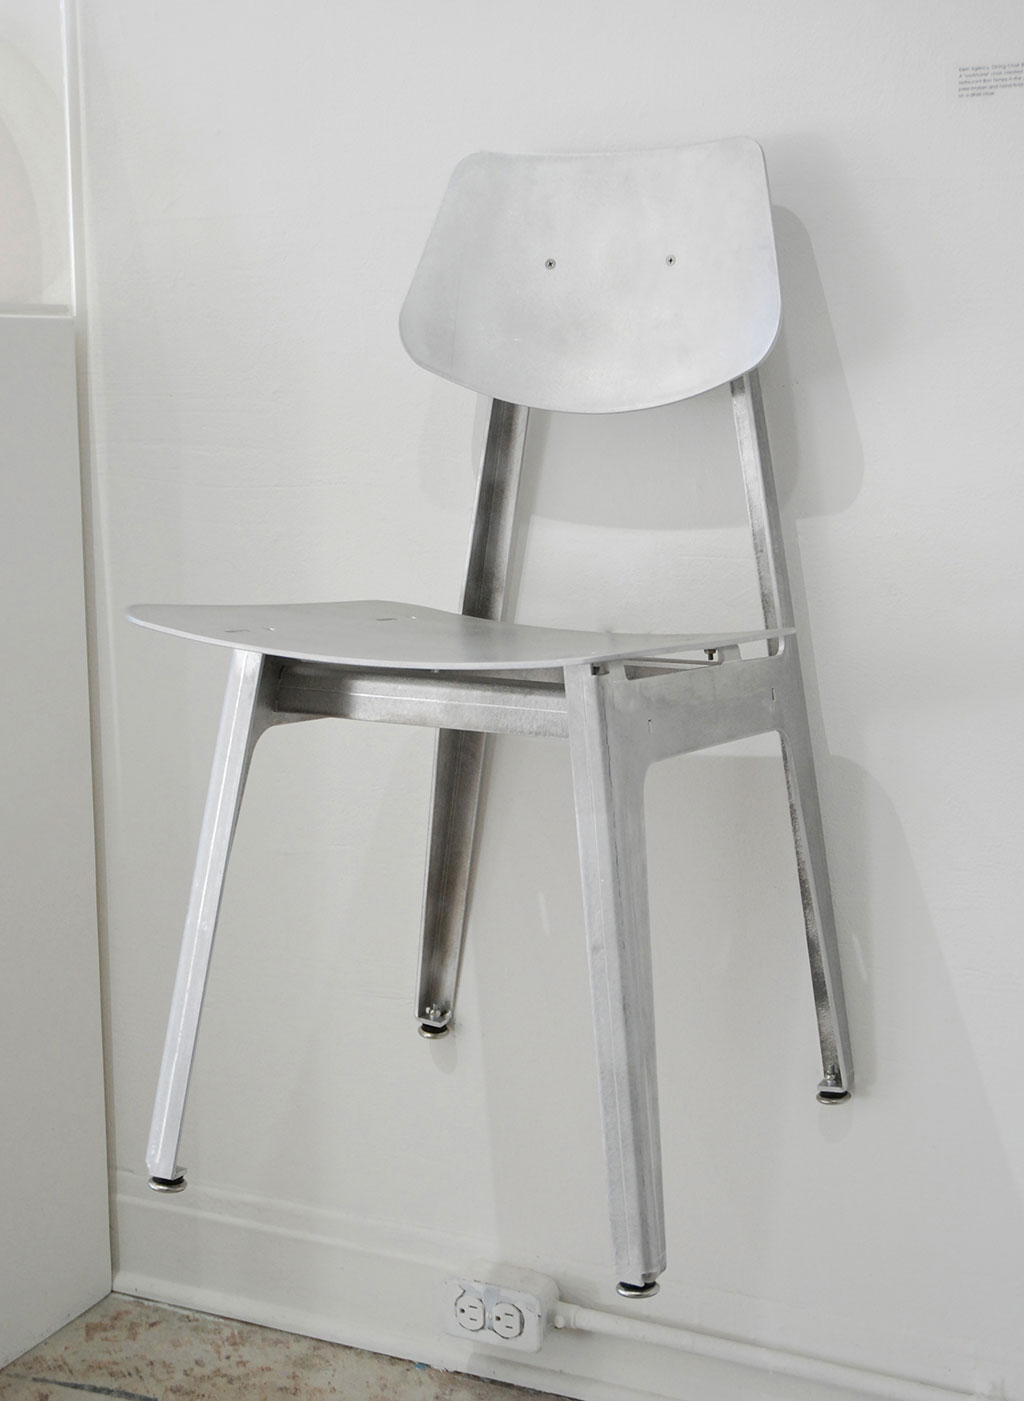 Klein Agency, Dining Chair BT, Aluminum, 2017, Bon Temps, Consume: Handcrafting L.A. Restaurant Design, Craft in America